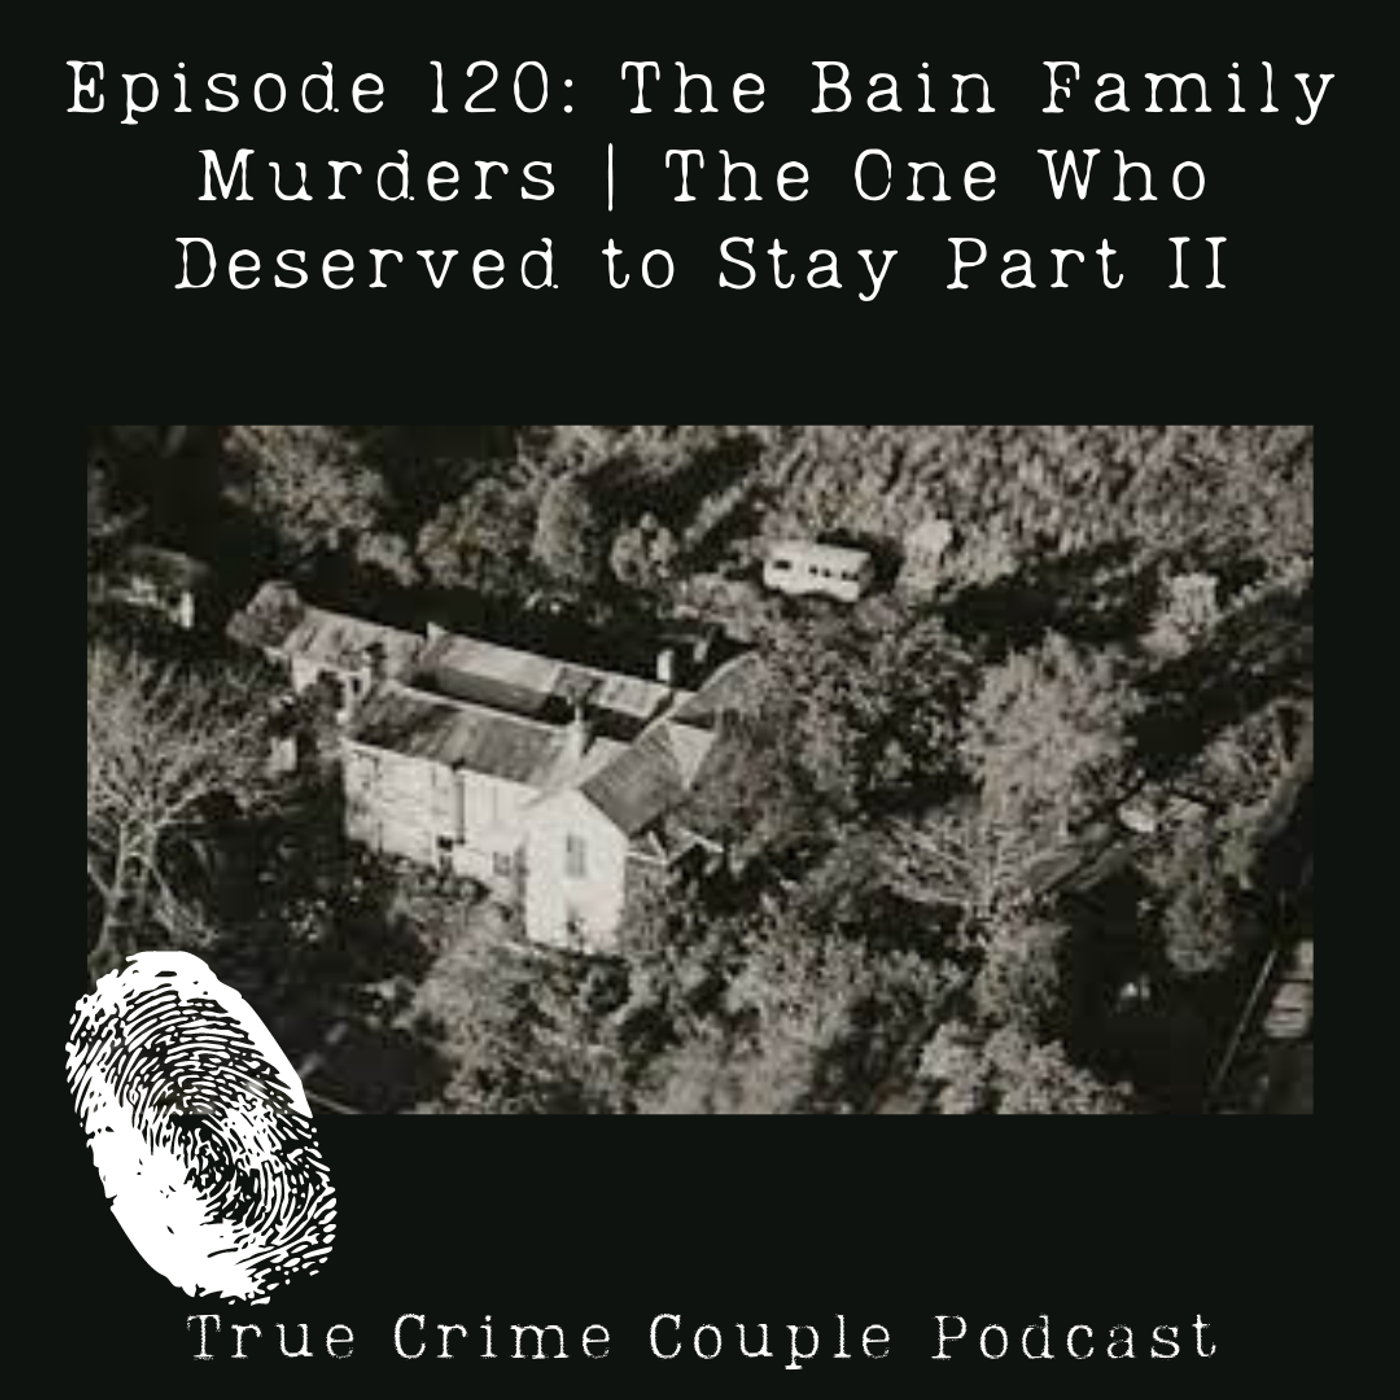 Episode 120: The Bain Family Murders | The One Who Deserved to Stay Part II